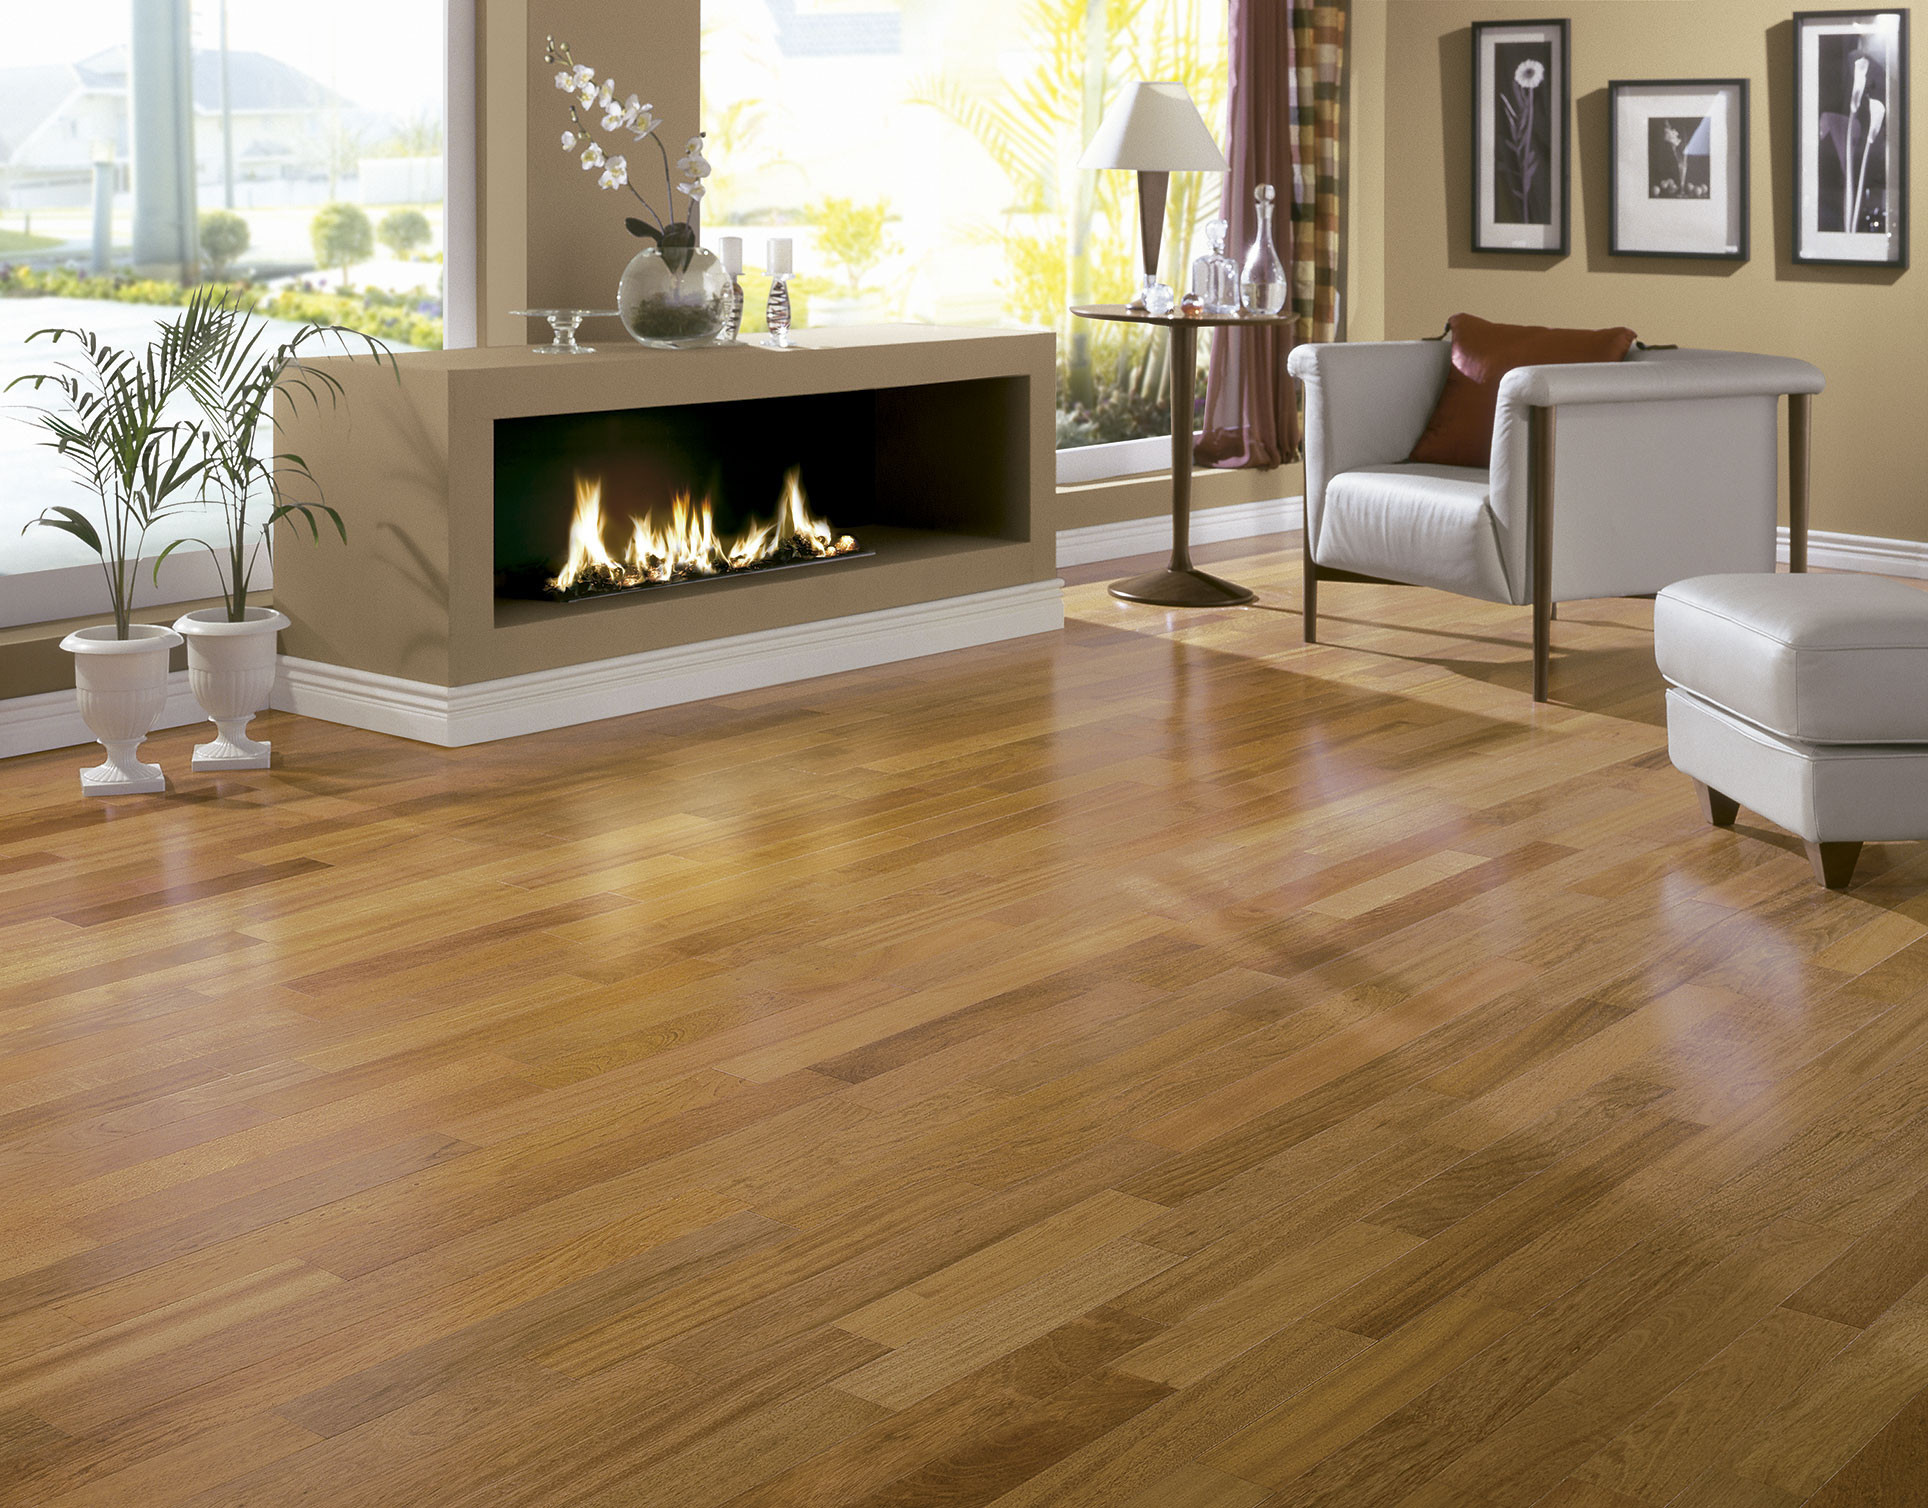 12 Fantastic Hardwood Flooring Warehouse Near Me 2024 free download hardwood flooring warehouse near me of forest accents wood floor lovely engaging discount hardwood flooring regarding forest accents wood floor lovely engaging discount hardwood flooring 5 w